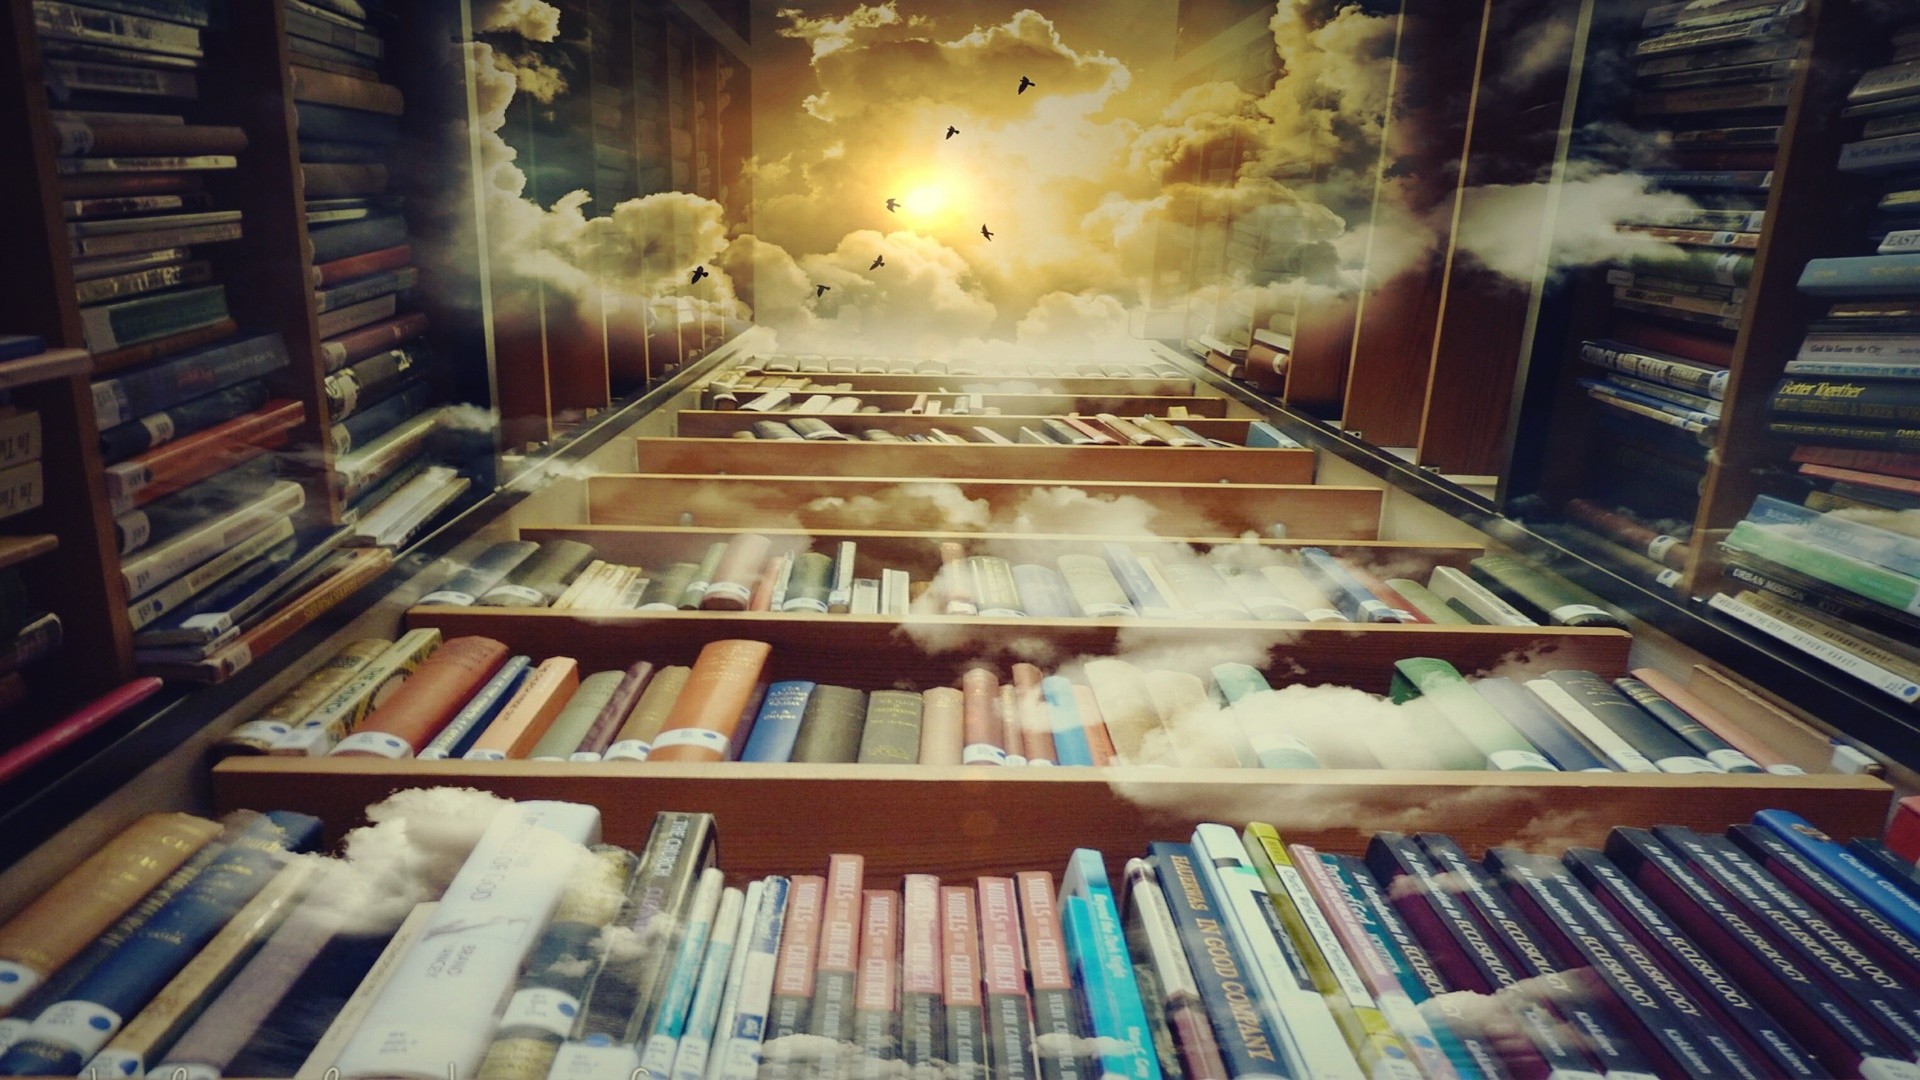 brain, Sky, Books, Clouds, Studying, Culture Wallpaper